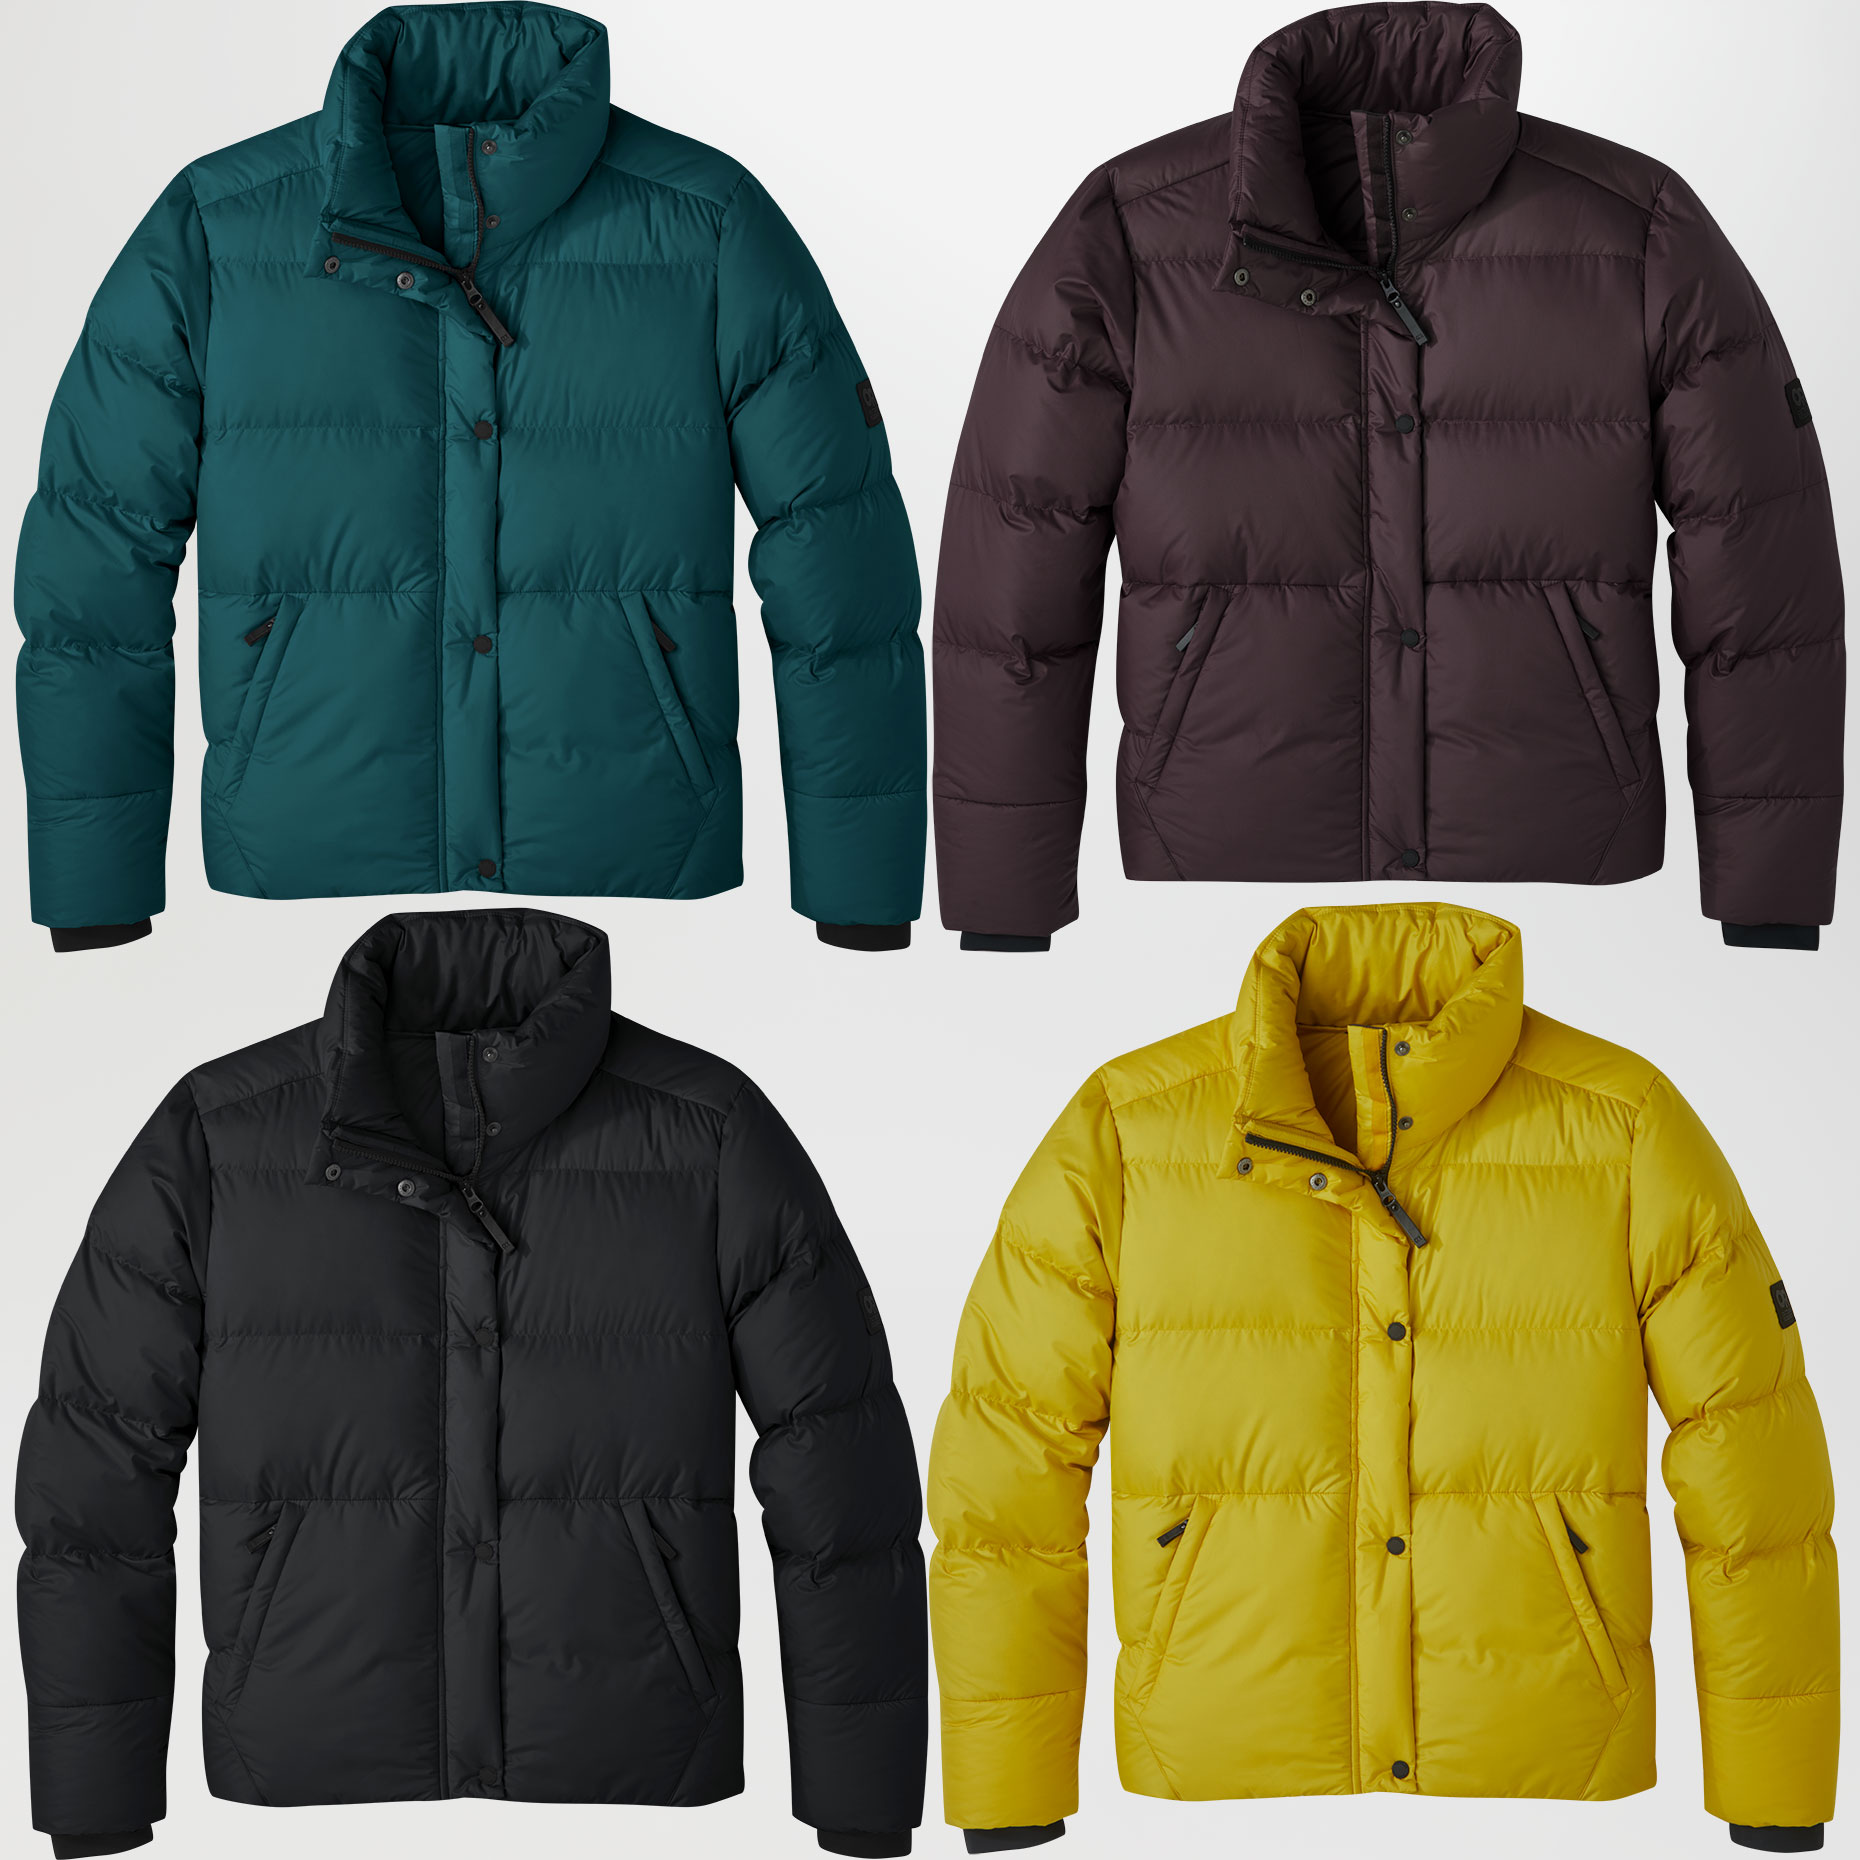 Outdoor Research Product Studio Photography Jacket  Post Production Color Correction